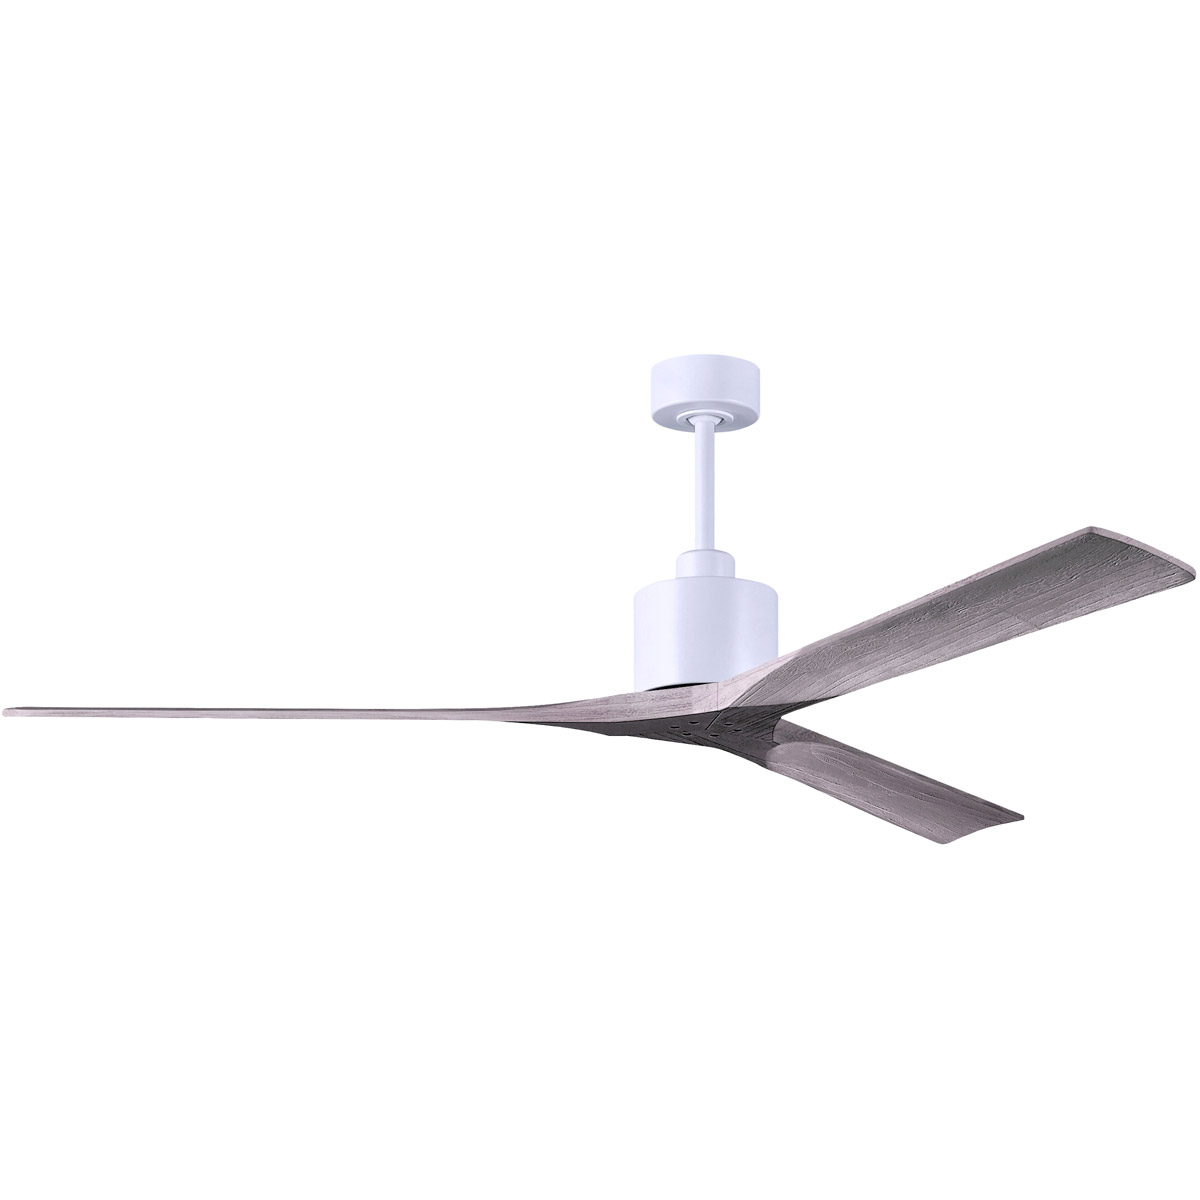 Picture of Atlas NKXL-MWH-LM-72 72 in. Nan XL Light Maple Tone Blades Ceiling Fan, Matte White